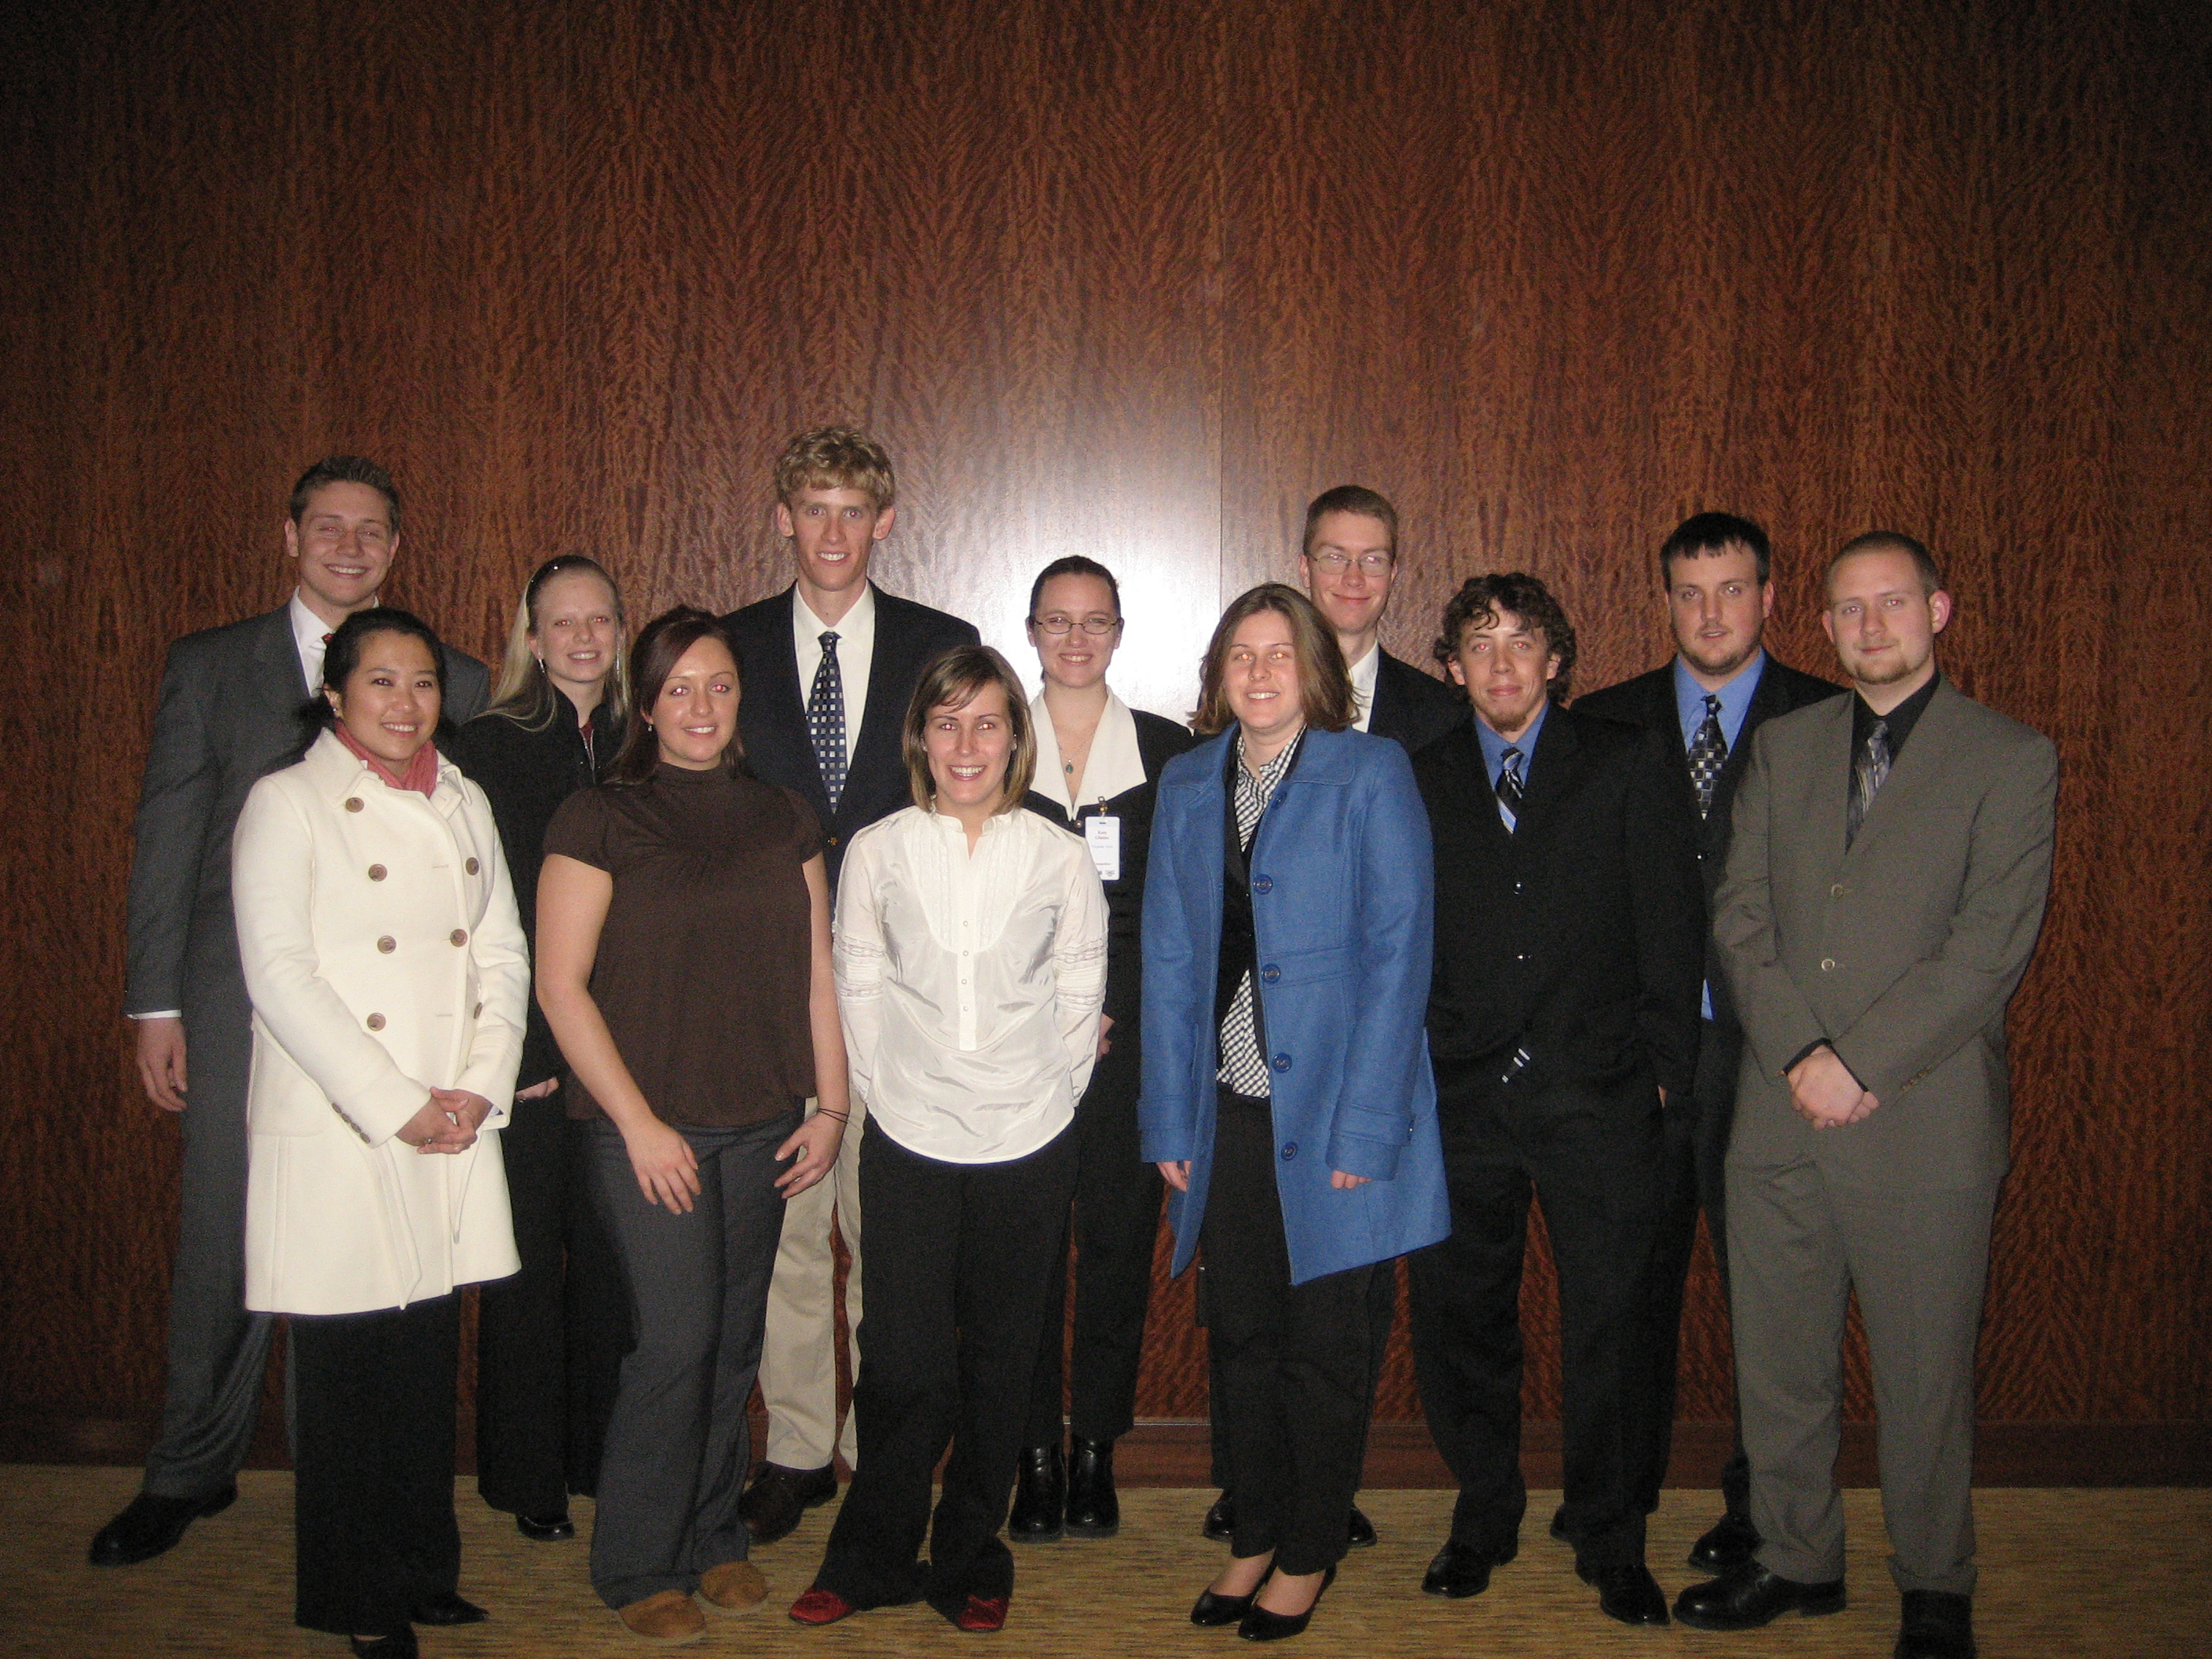 Pictured are the mining engineering students of the 2008 Virginia Tech Student Design Competition teams. Back row, left to right, are: Alek Duerksen, Holly Fitz, Andrew Storey, Kate Glusiec, David McConnell, and James Winfield. Front row, left to right, are: Rosalyn de la Pena, Carolyn Relyea, Erica Doolittle, Bridget Mead, Travis Tyndall, and John Bowling.